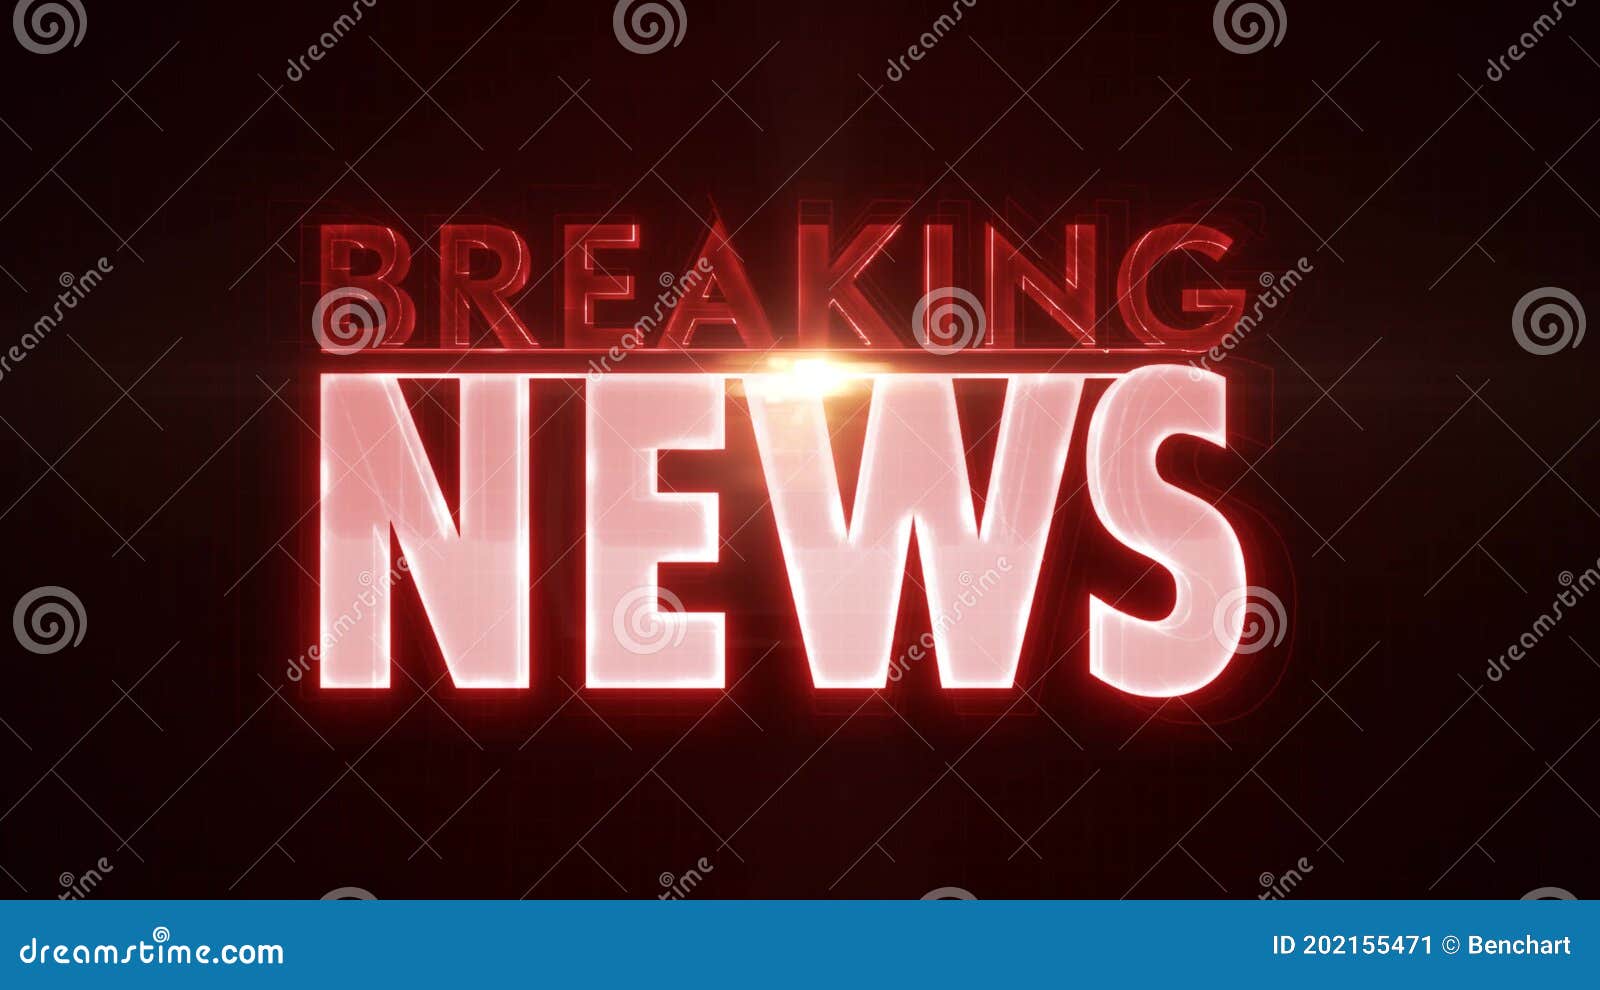 Breaking News Cyber Technology Background Animation Stock Video - Video of  entertainment, event: 202155471